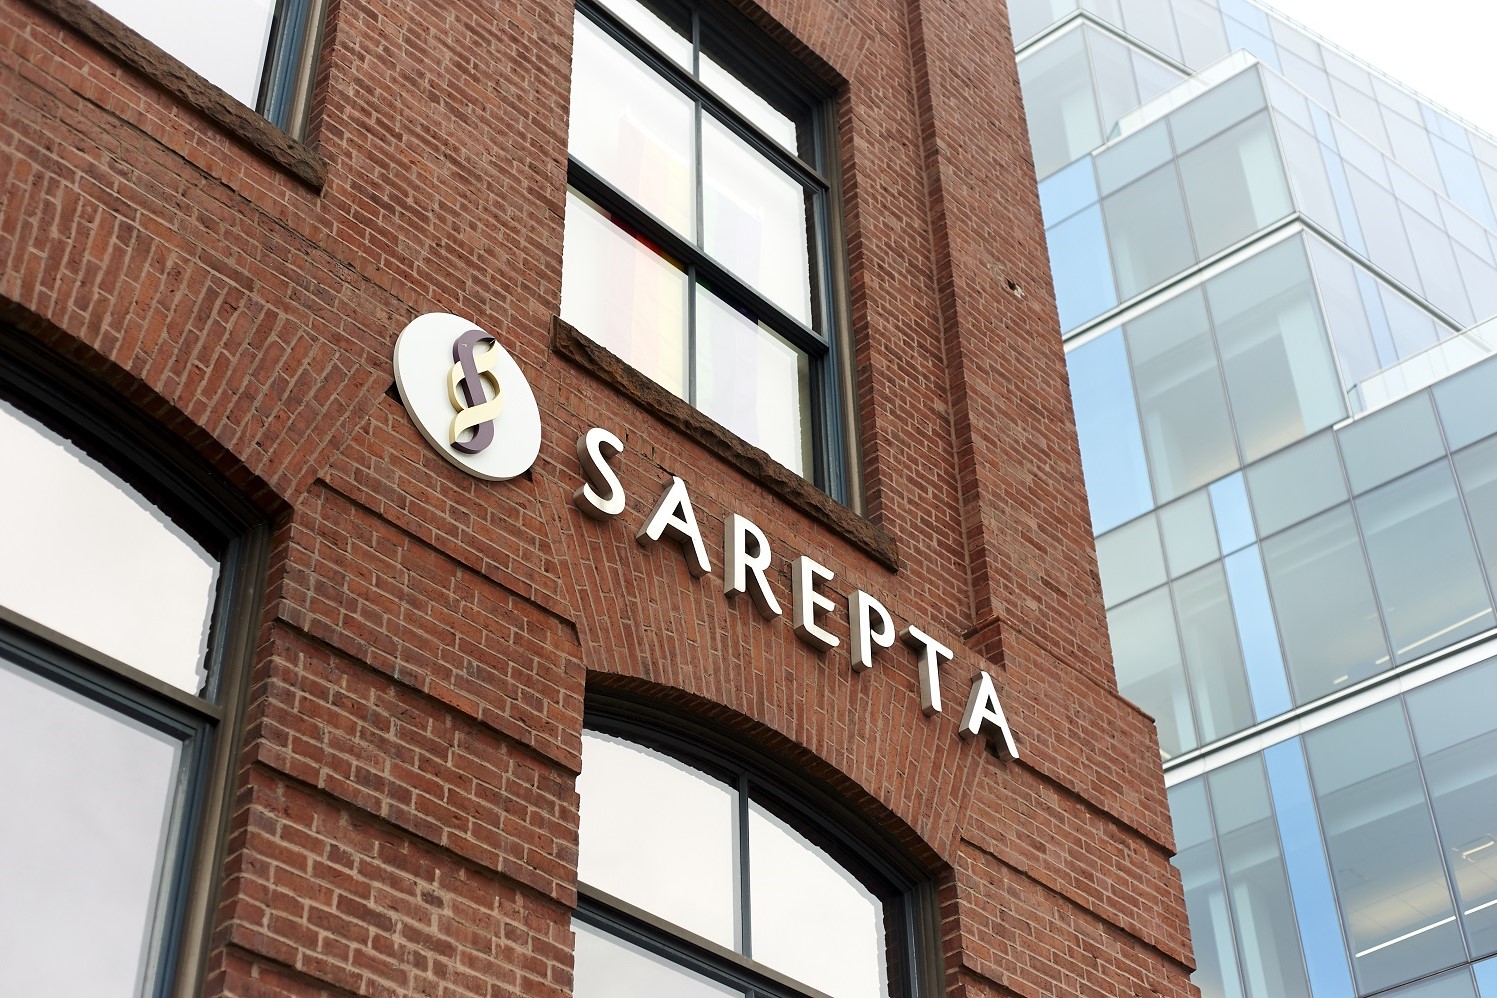 Top FDA Official Overrides Agency Staff to Approve Sarepta Gene Therapy